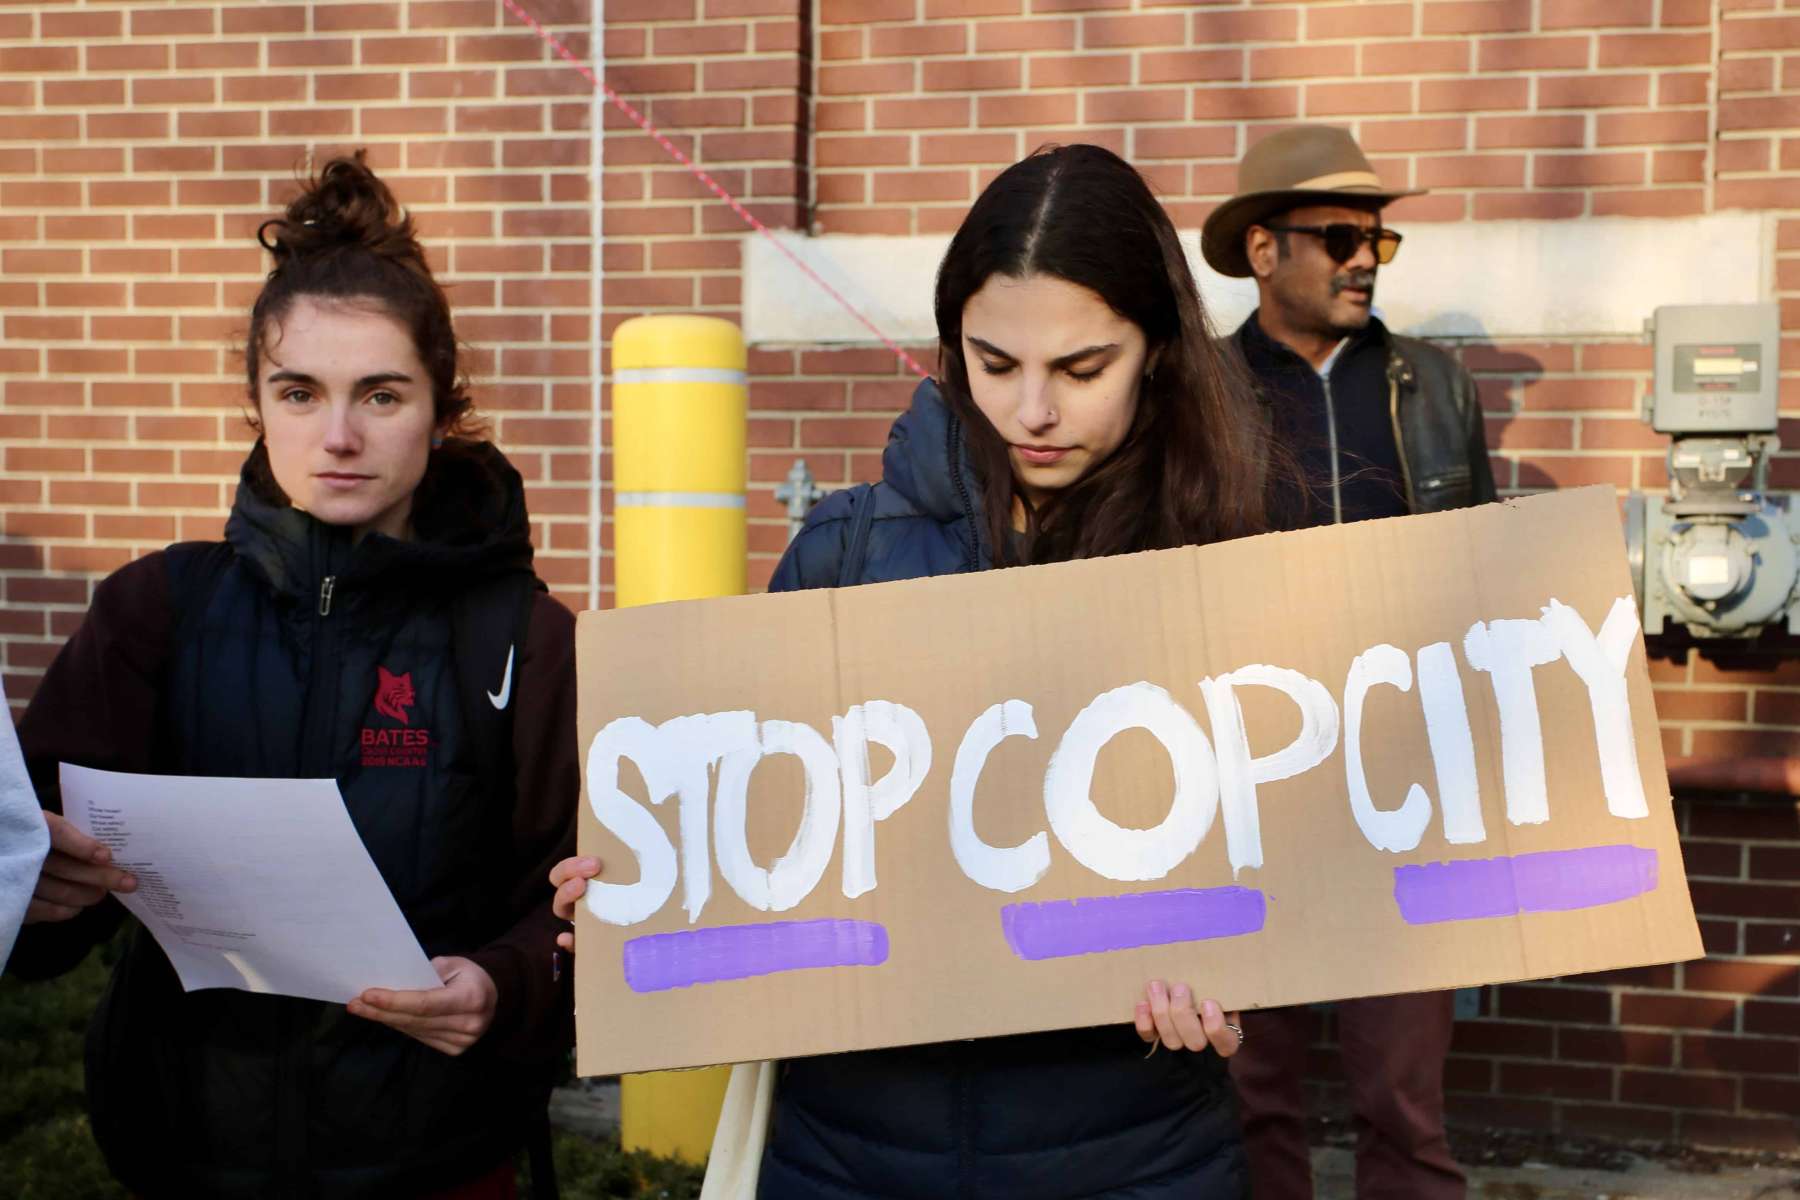 Rhode Island News: Stop Cop City protest in Providence calls for end to police immunity, cops in schools